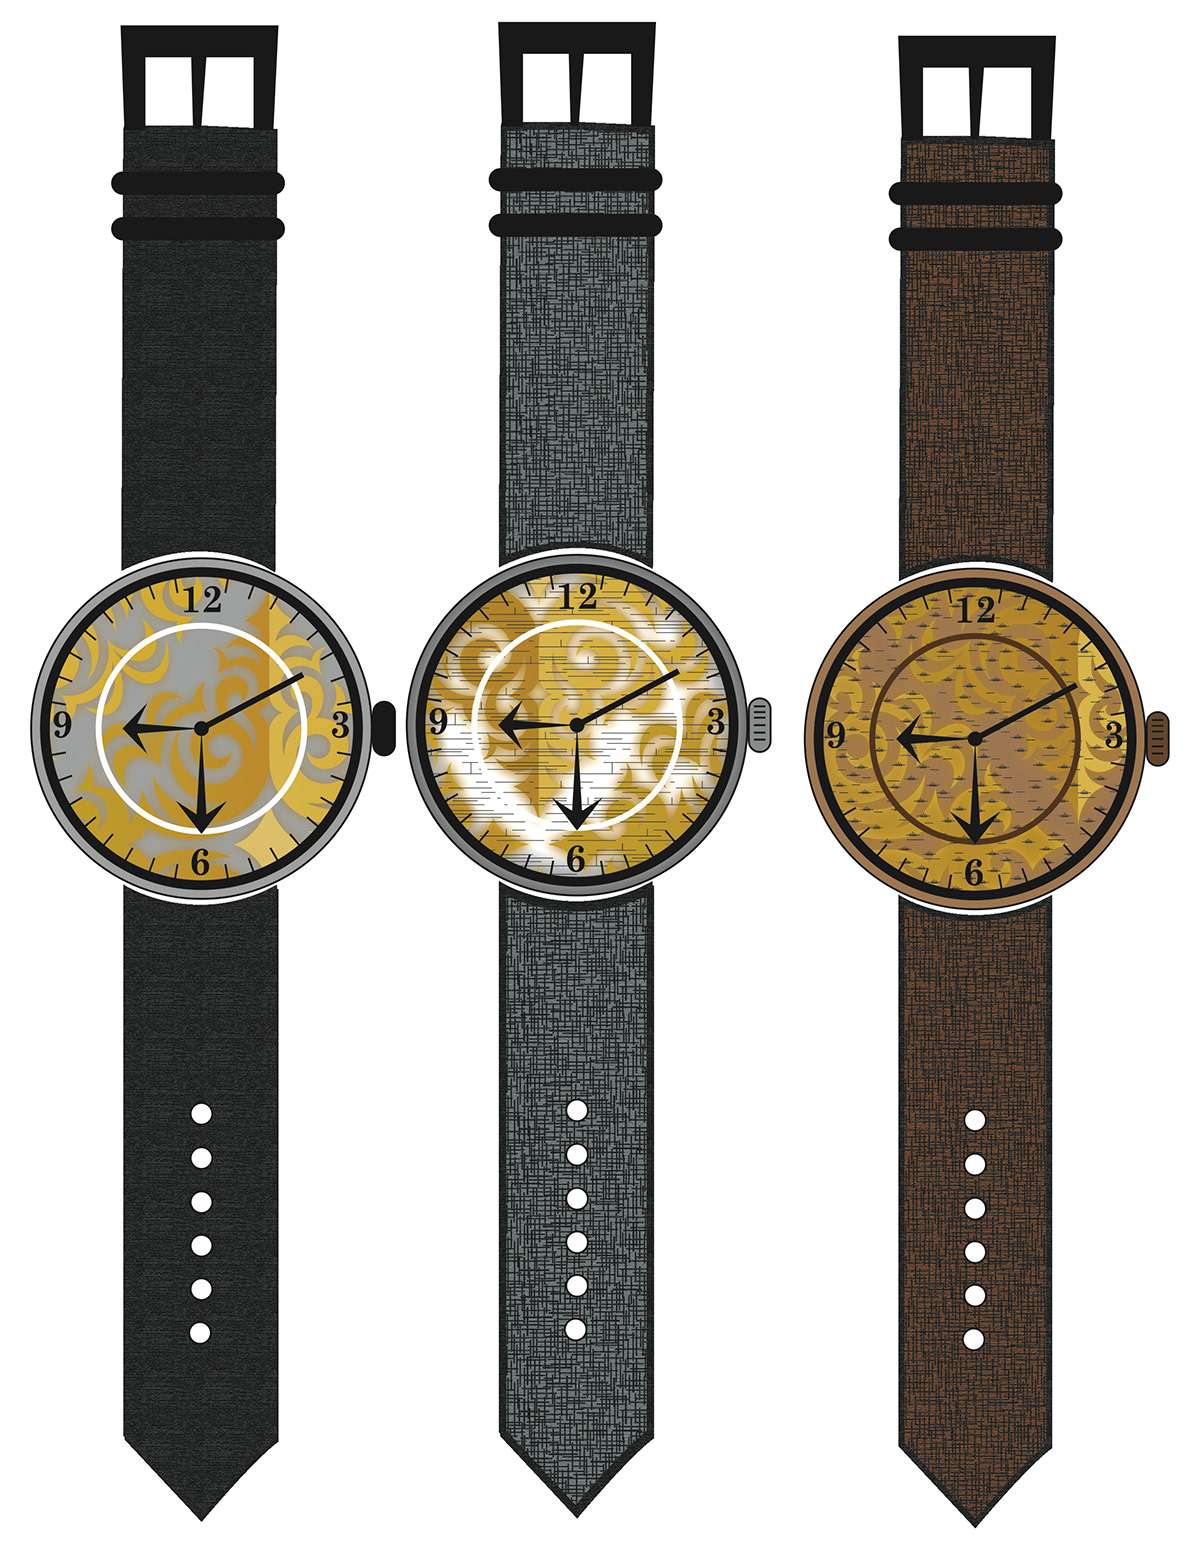 watch Watches Project design straps clock time movement